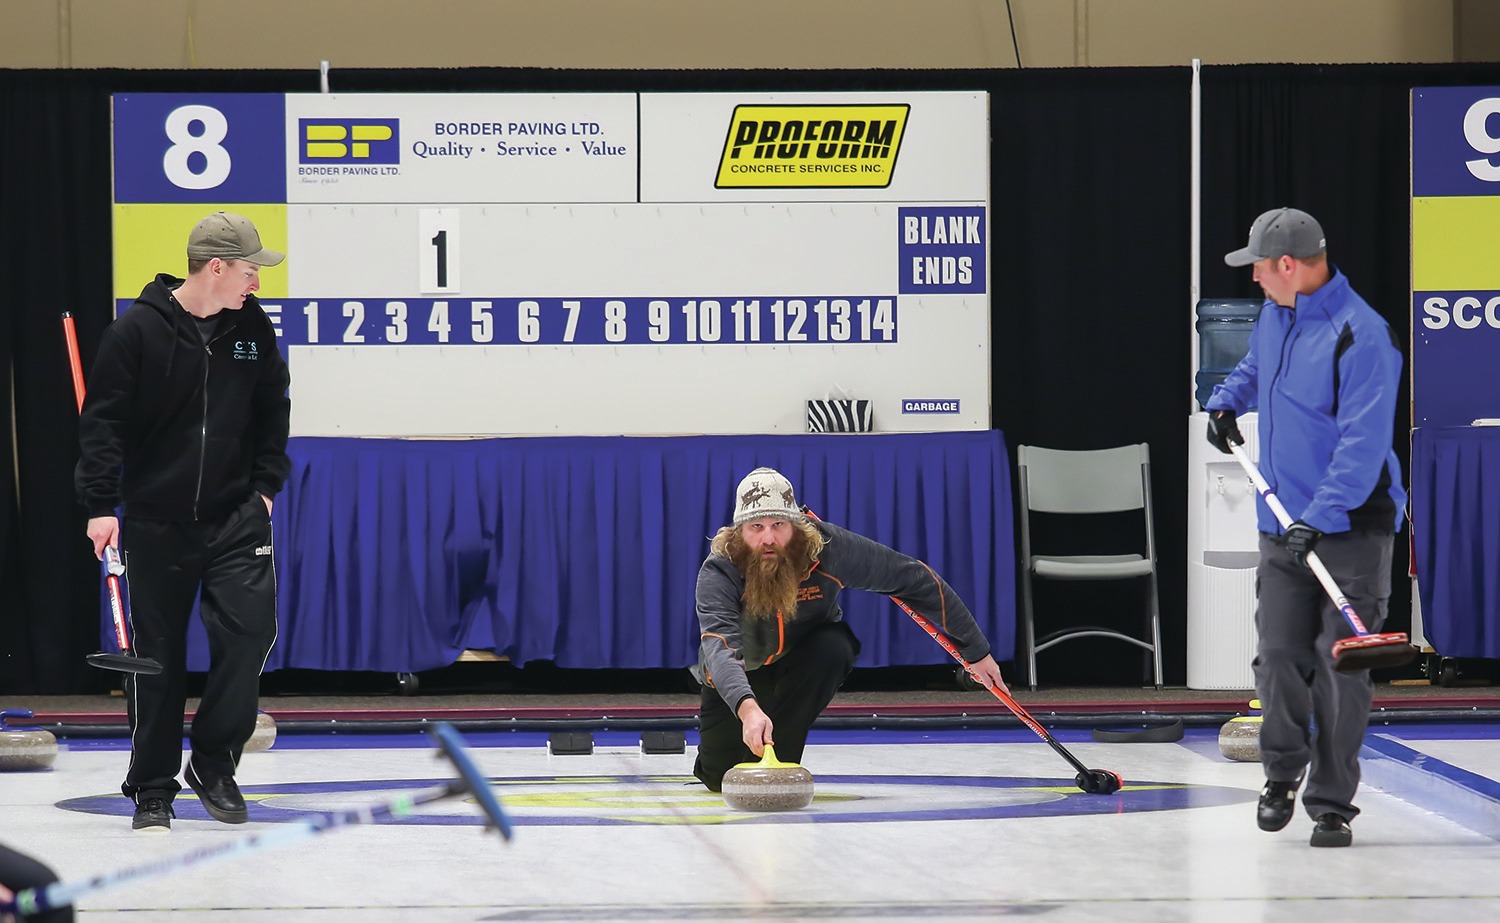 HURRY! - The CVS Controls team swept a rock down the ice during the Red Deer Oilmen’s Bonspiel at the Pidherney Centre.